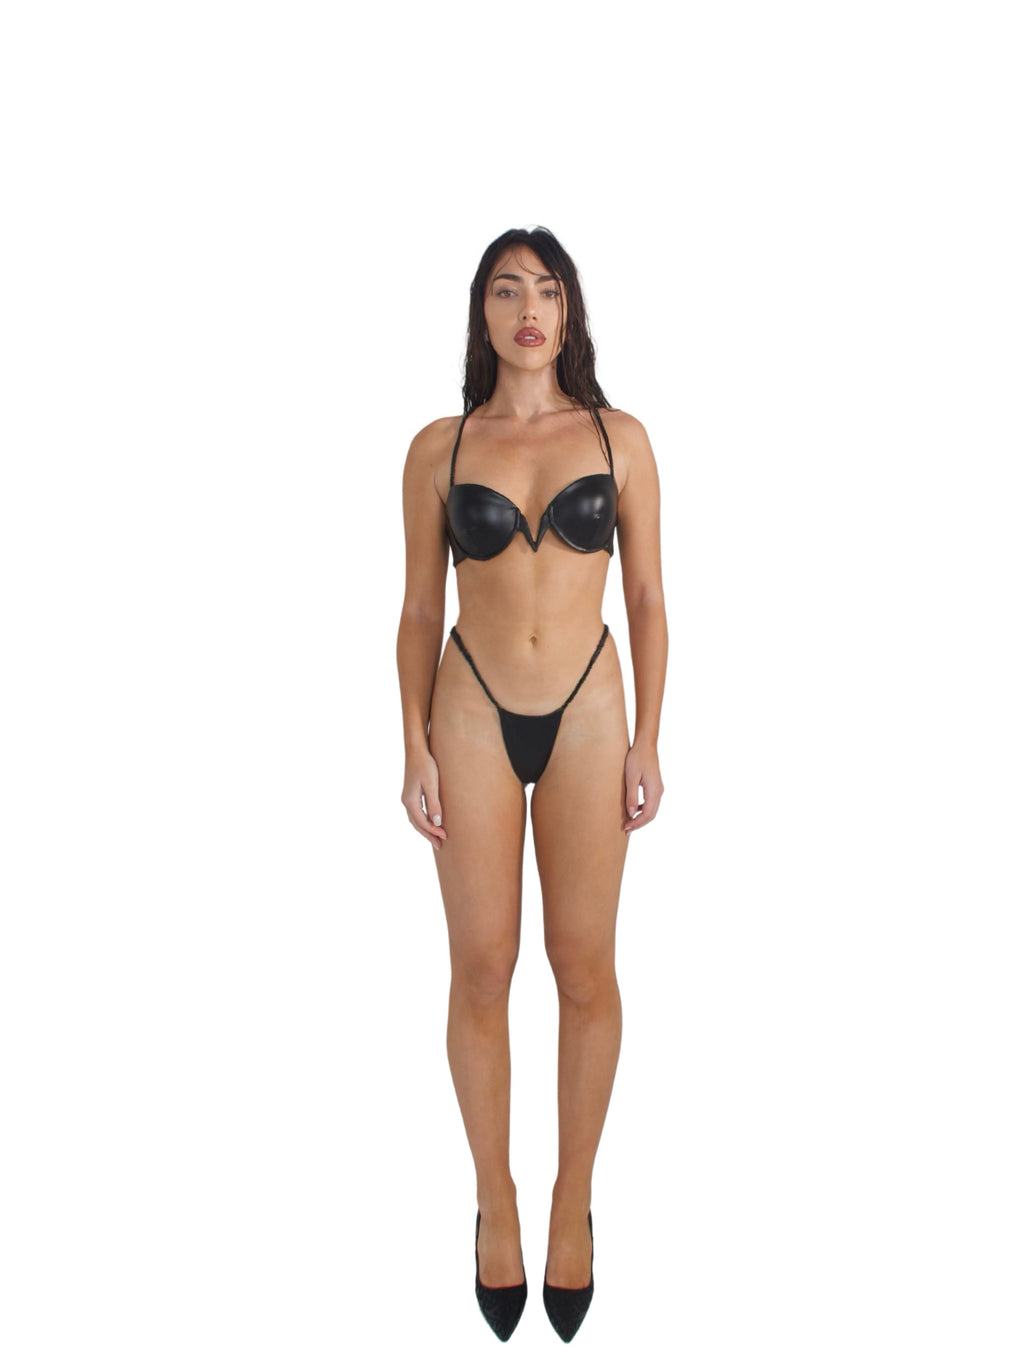 LEATHER CREST THONG - SIREN THE BRAND